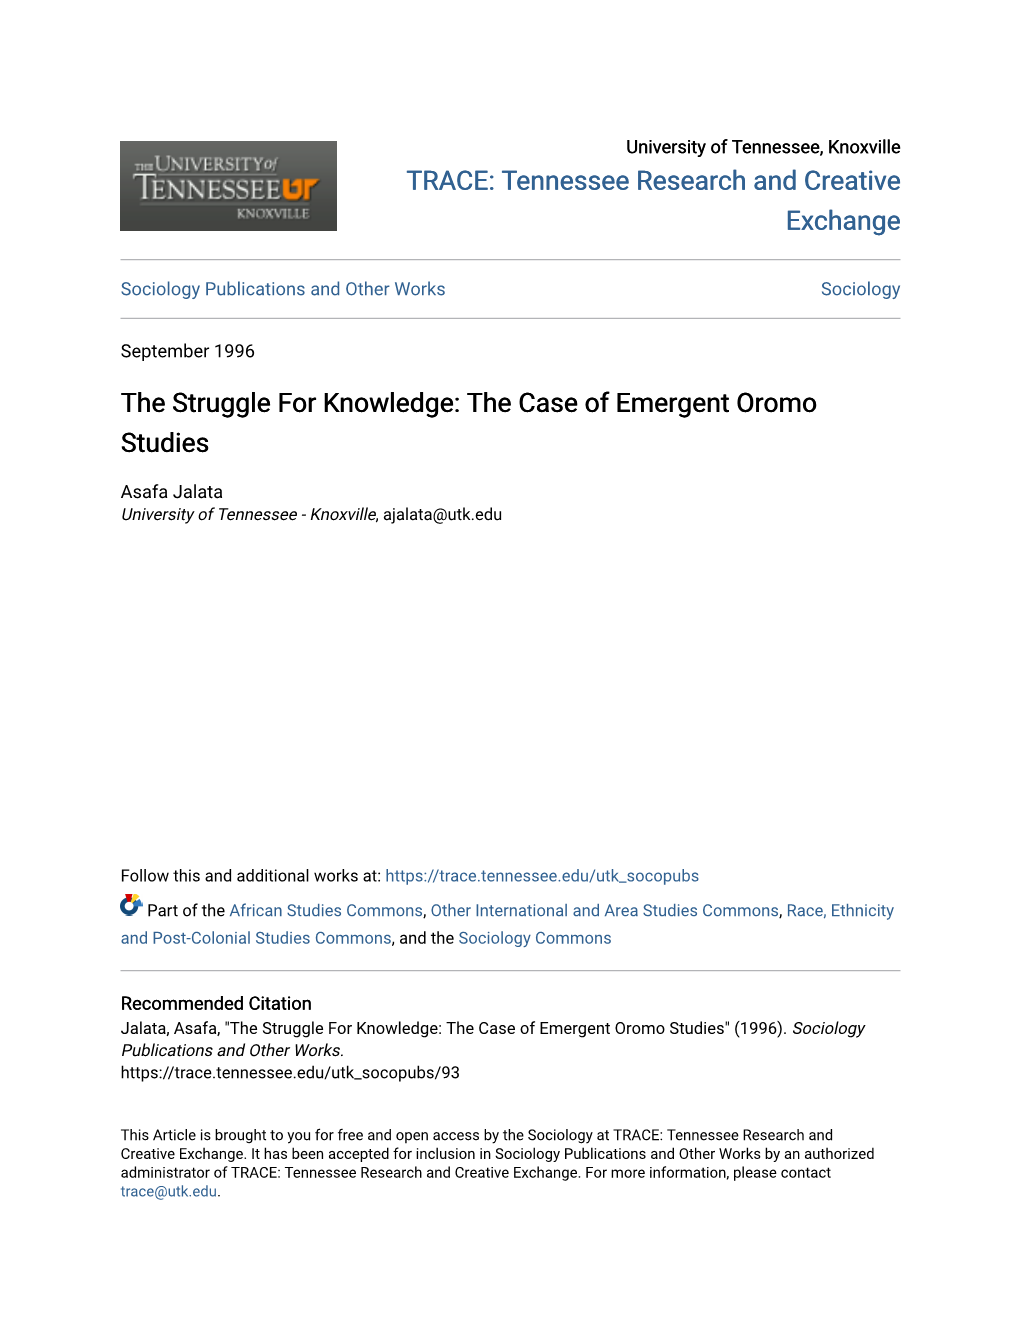 The Struggle for Knowledge: the Case of Emergent Oromo Studies